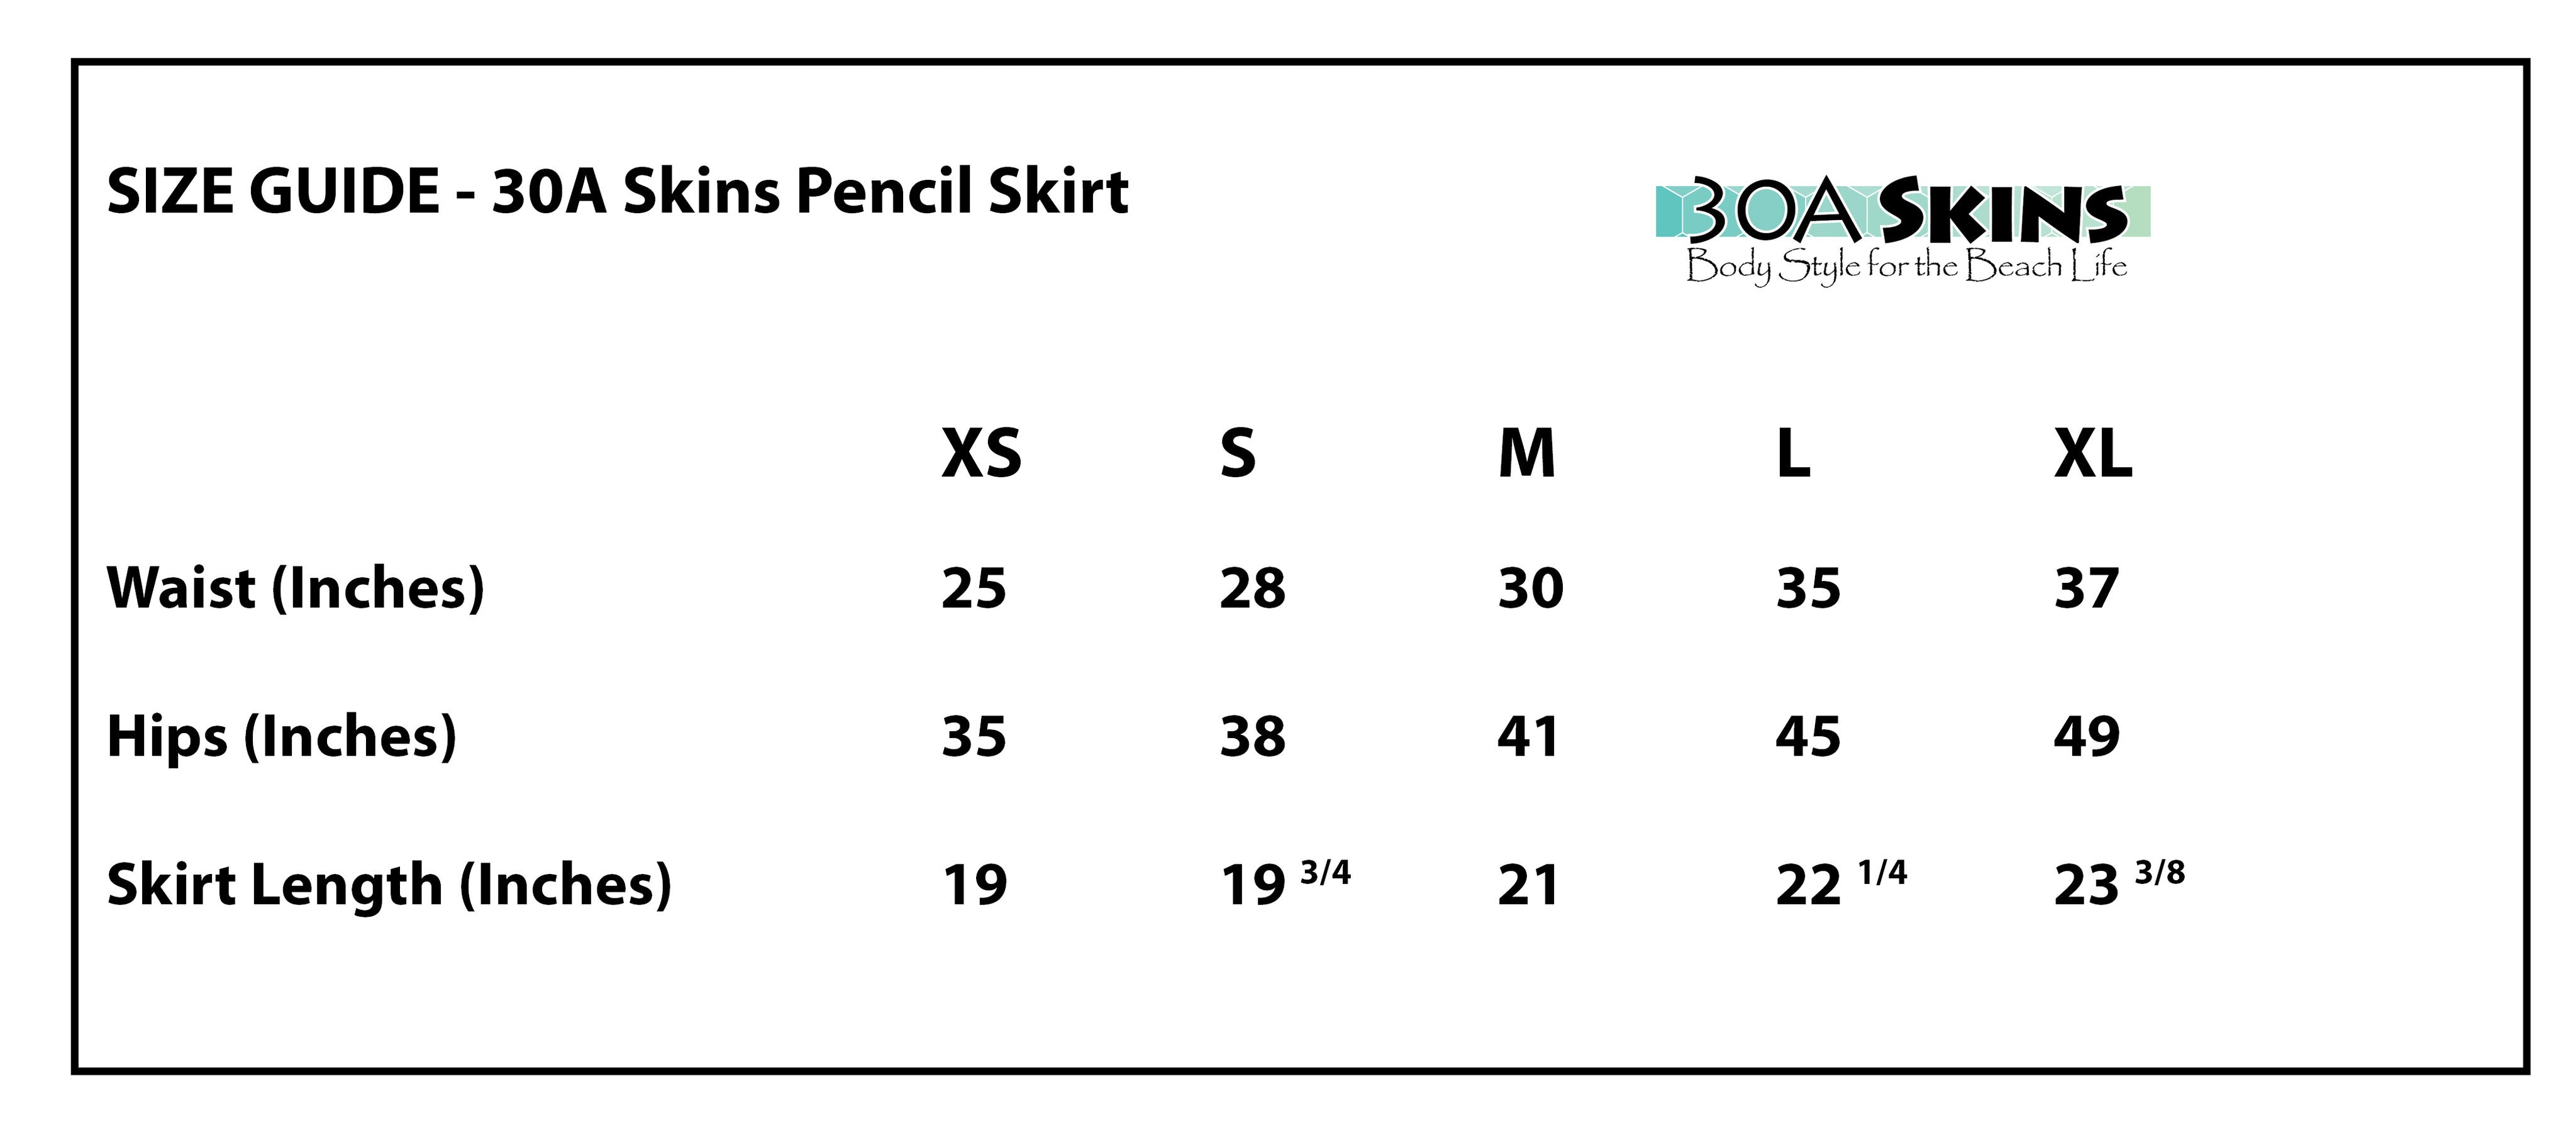 30a skins pencil skirt sizing chart